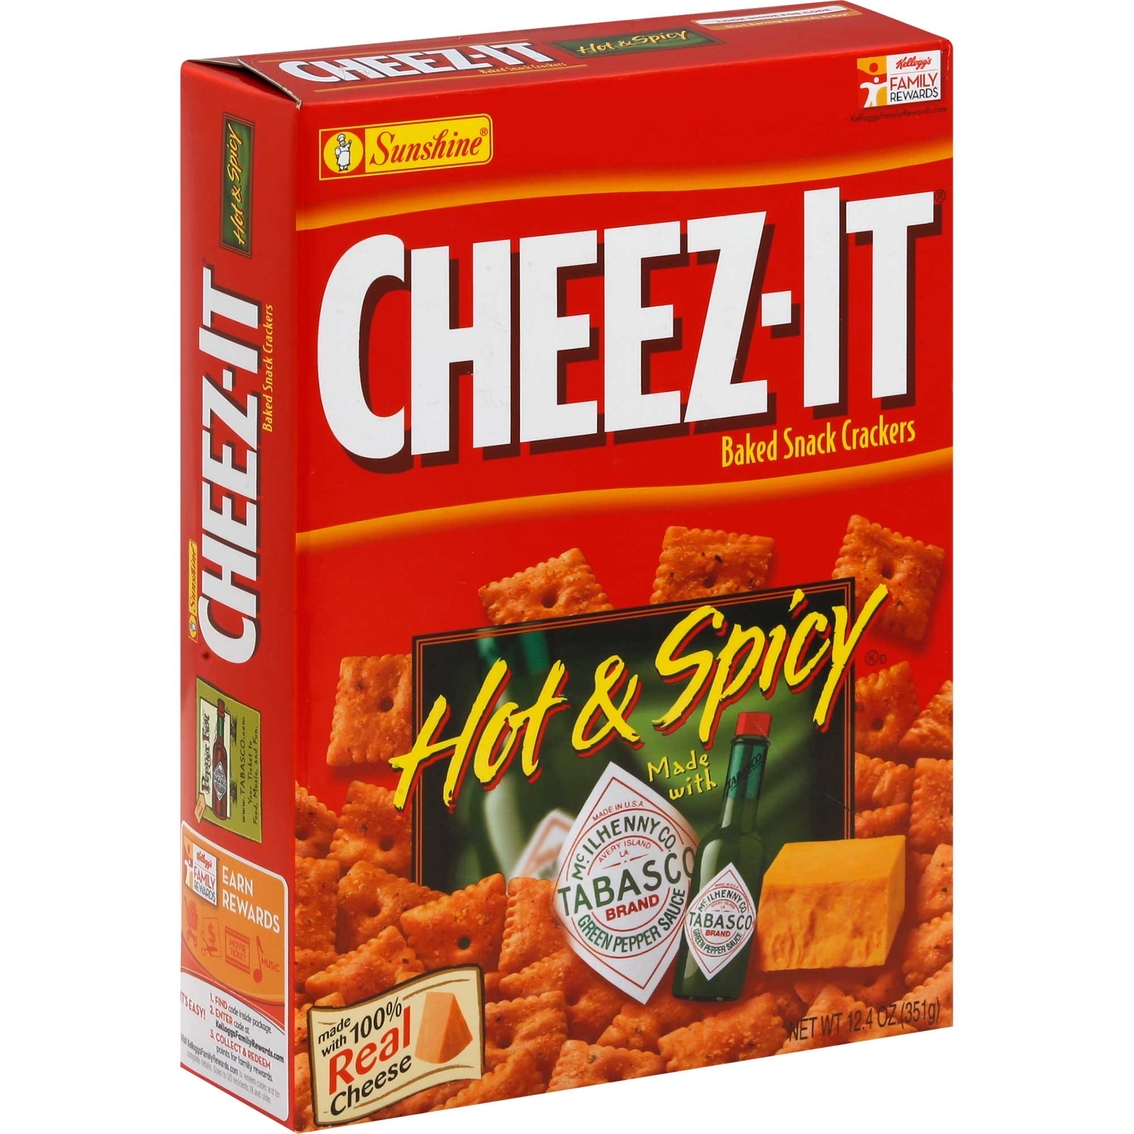 Kellogg's Cheez It Hot and Spicy Crackers 12.4 oz. - Image 2 of 2